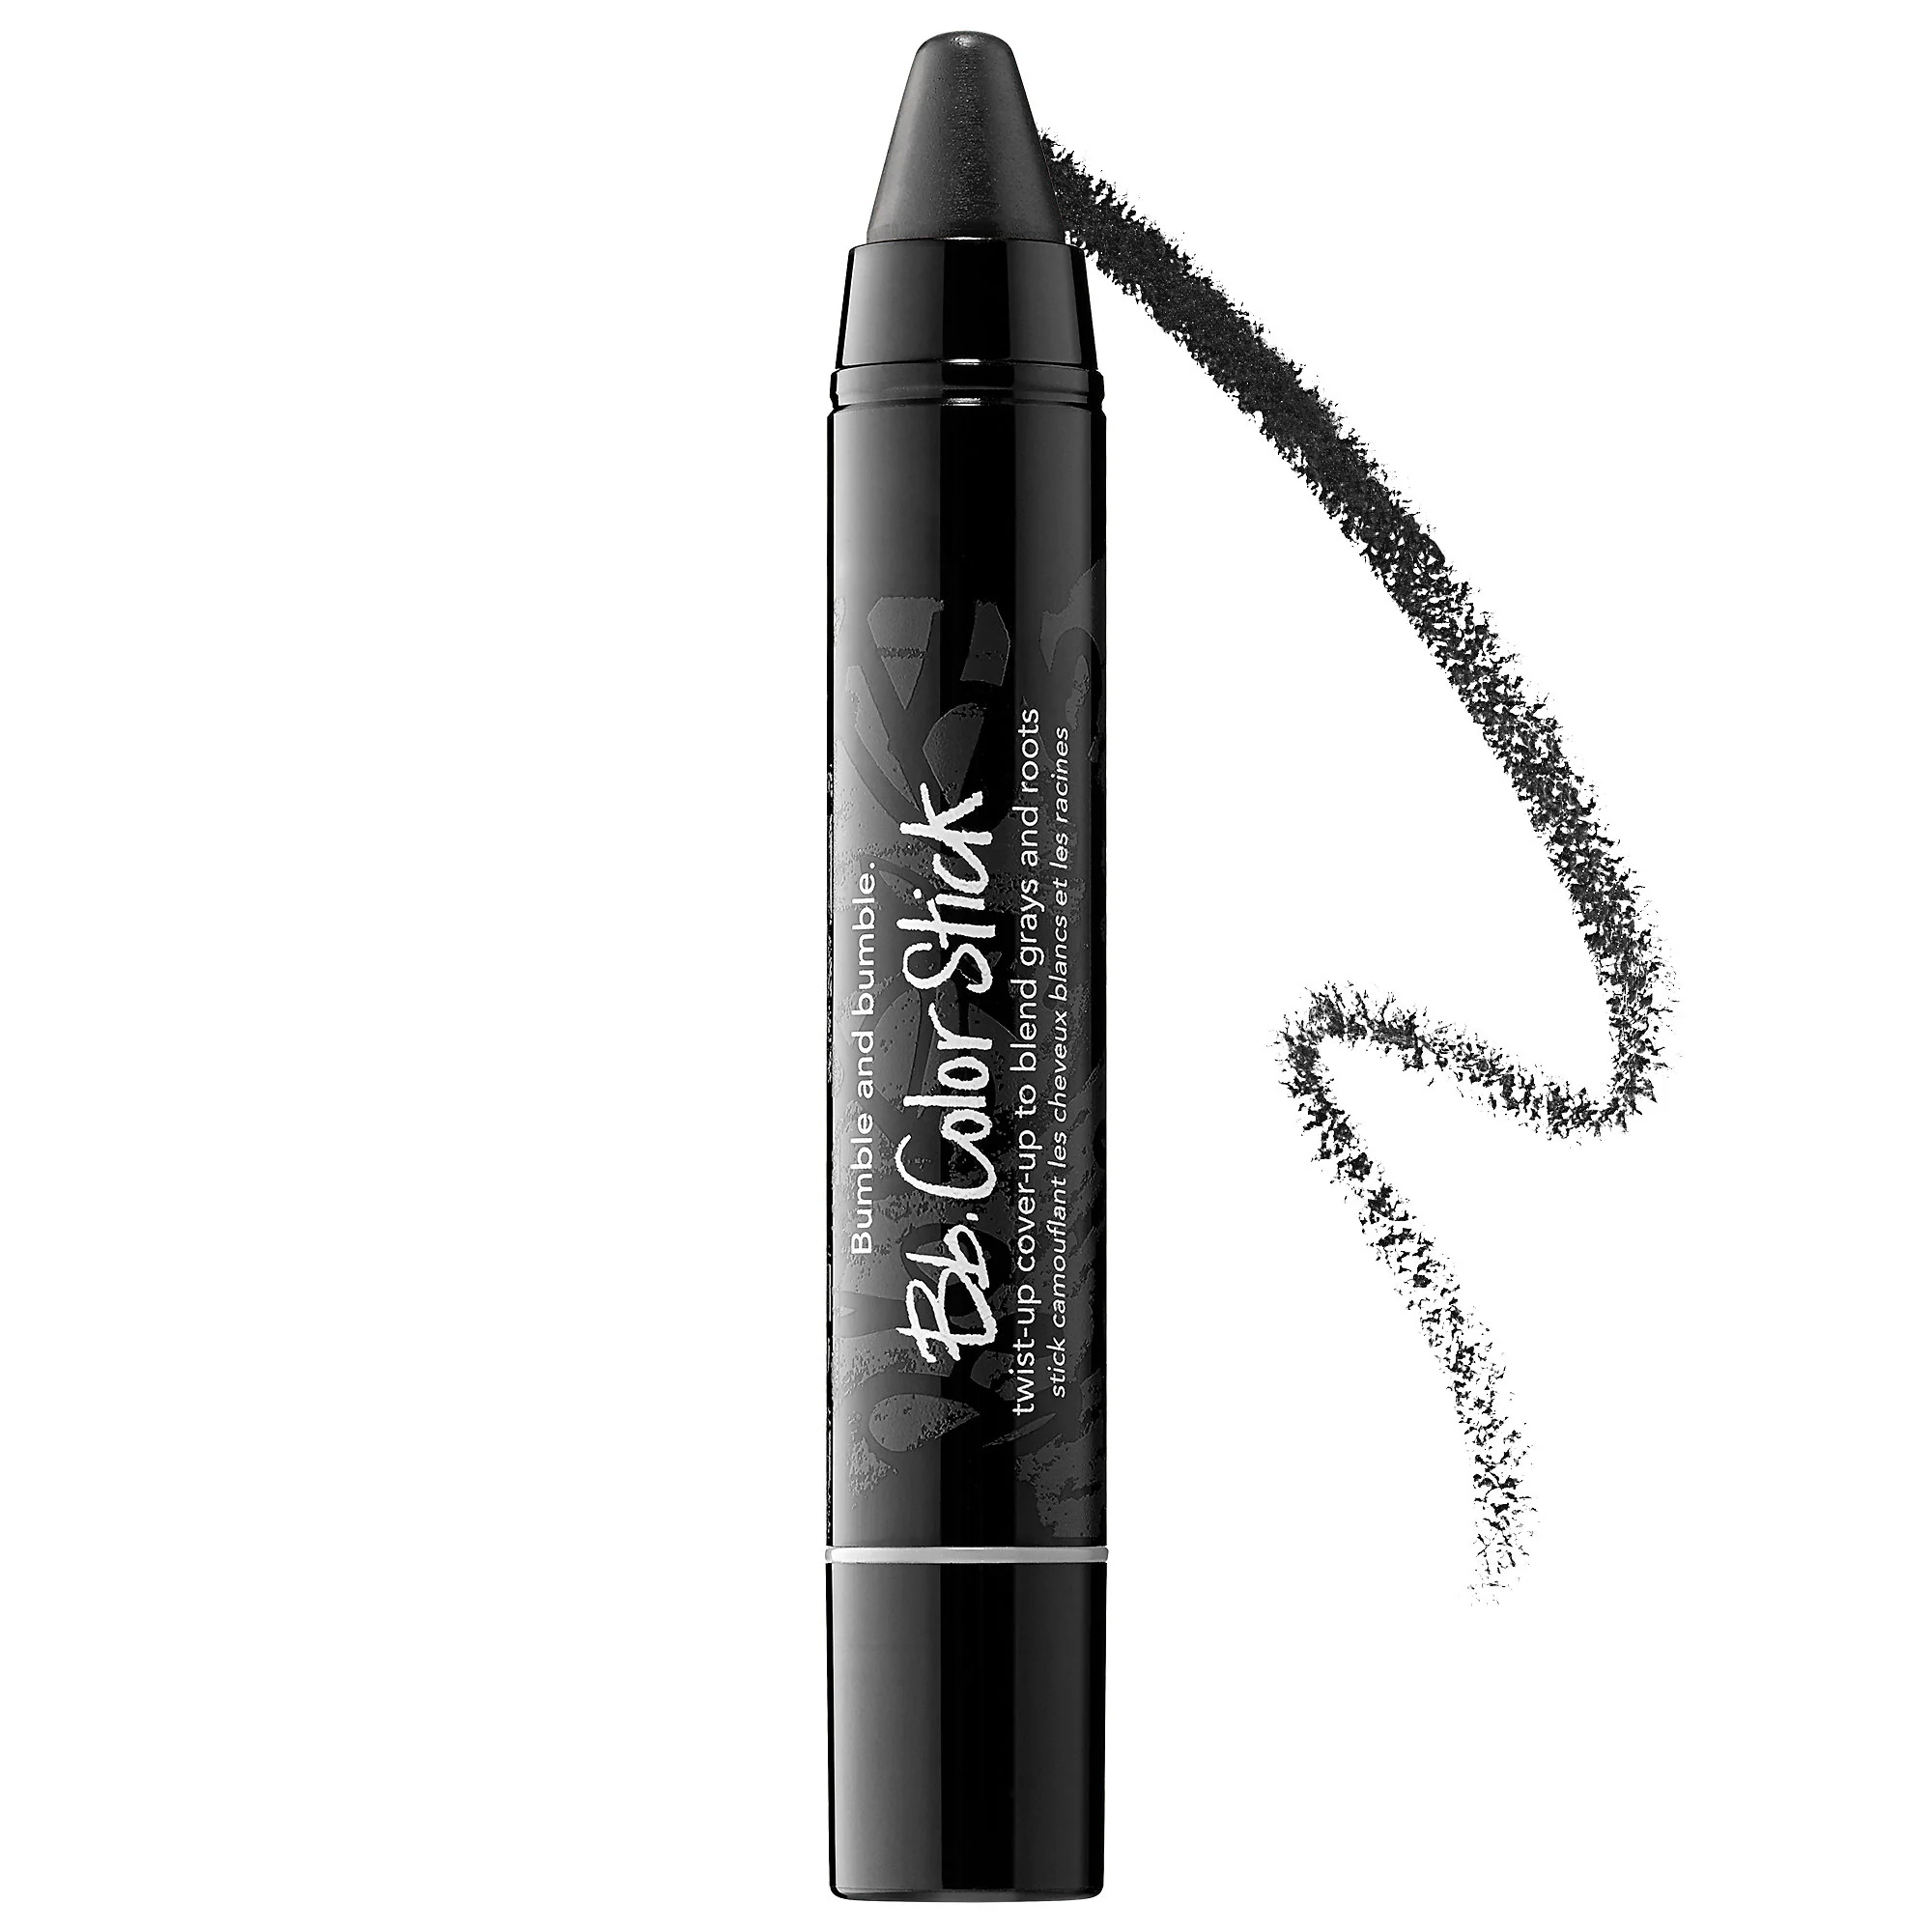 Bumble and bumble Color Stick / Black